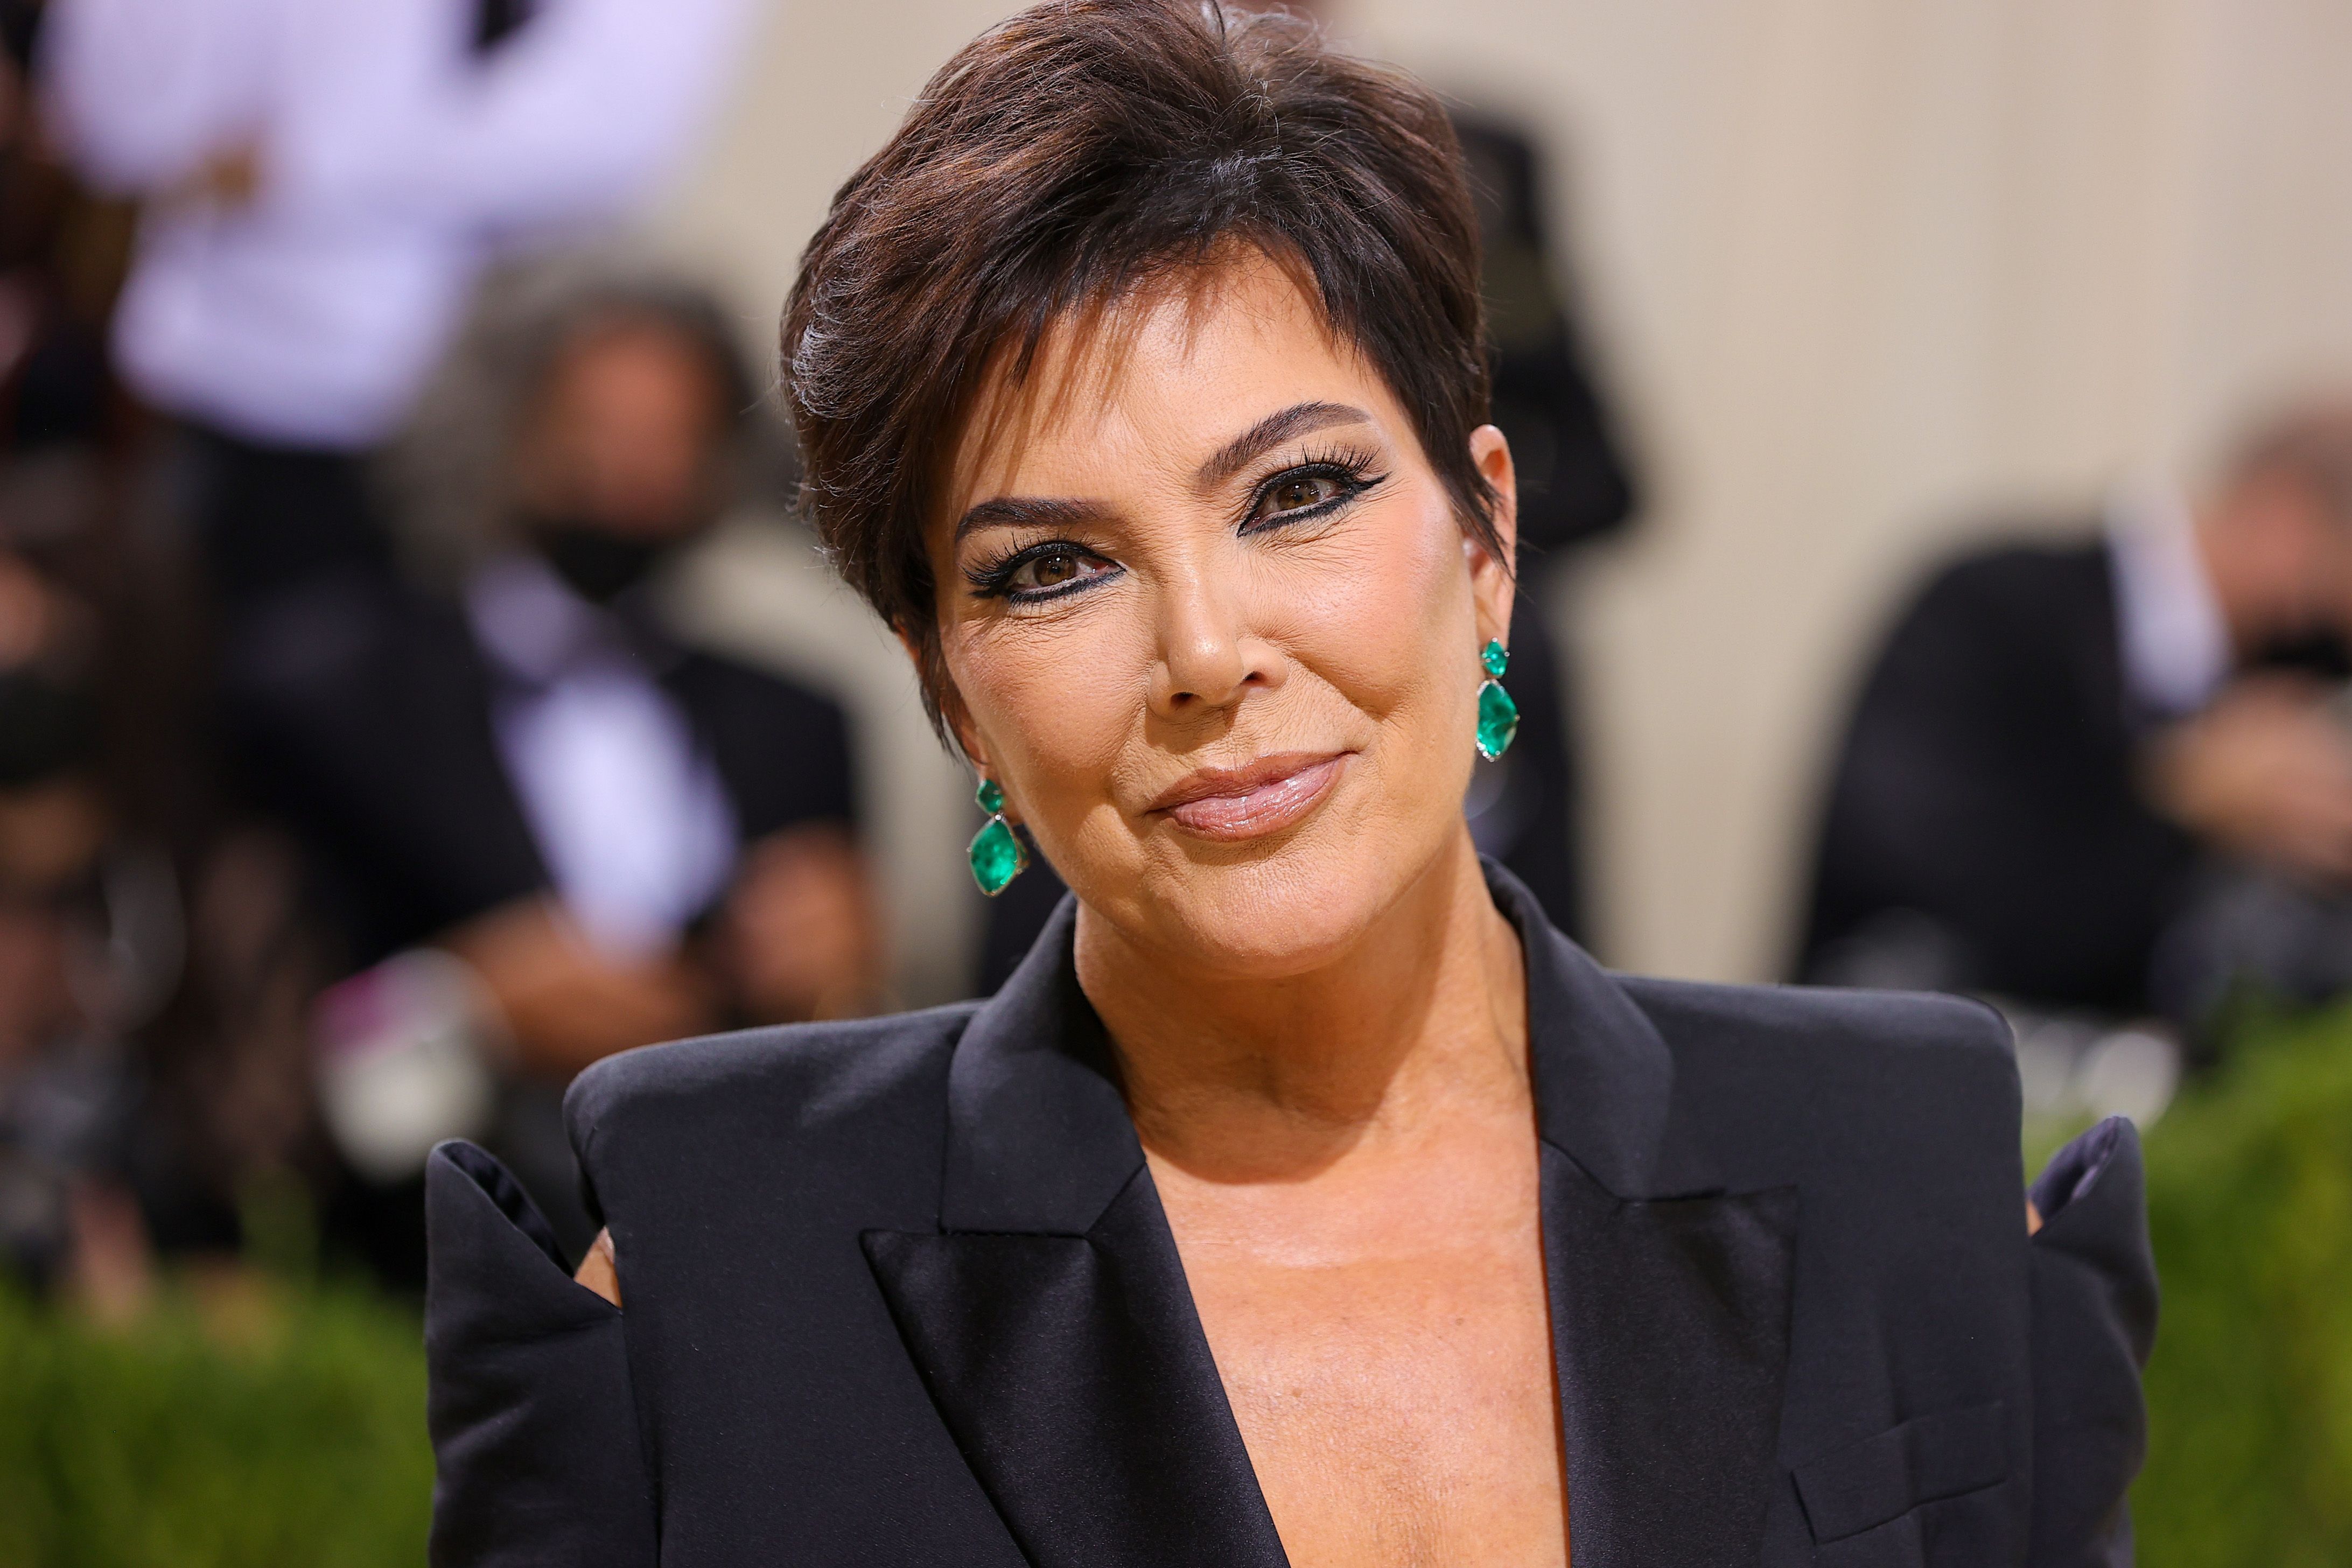 Kris Jenner Shows Off New Bob And Bangs Hairstyle